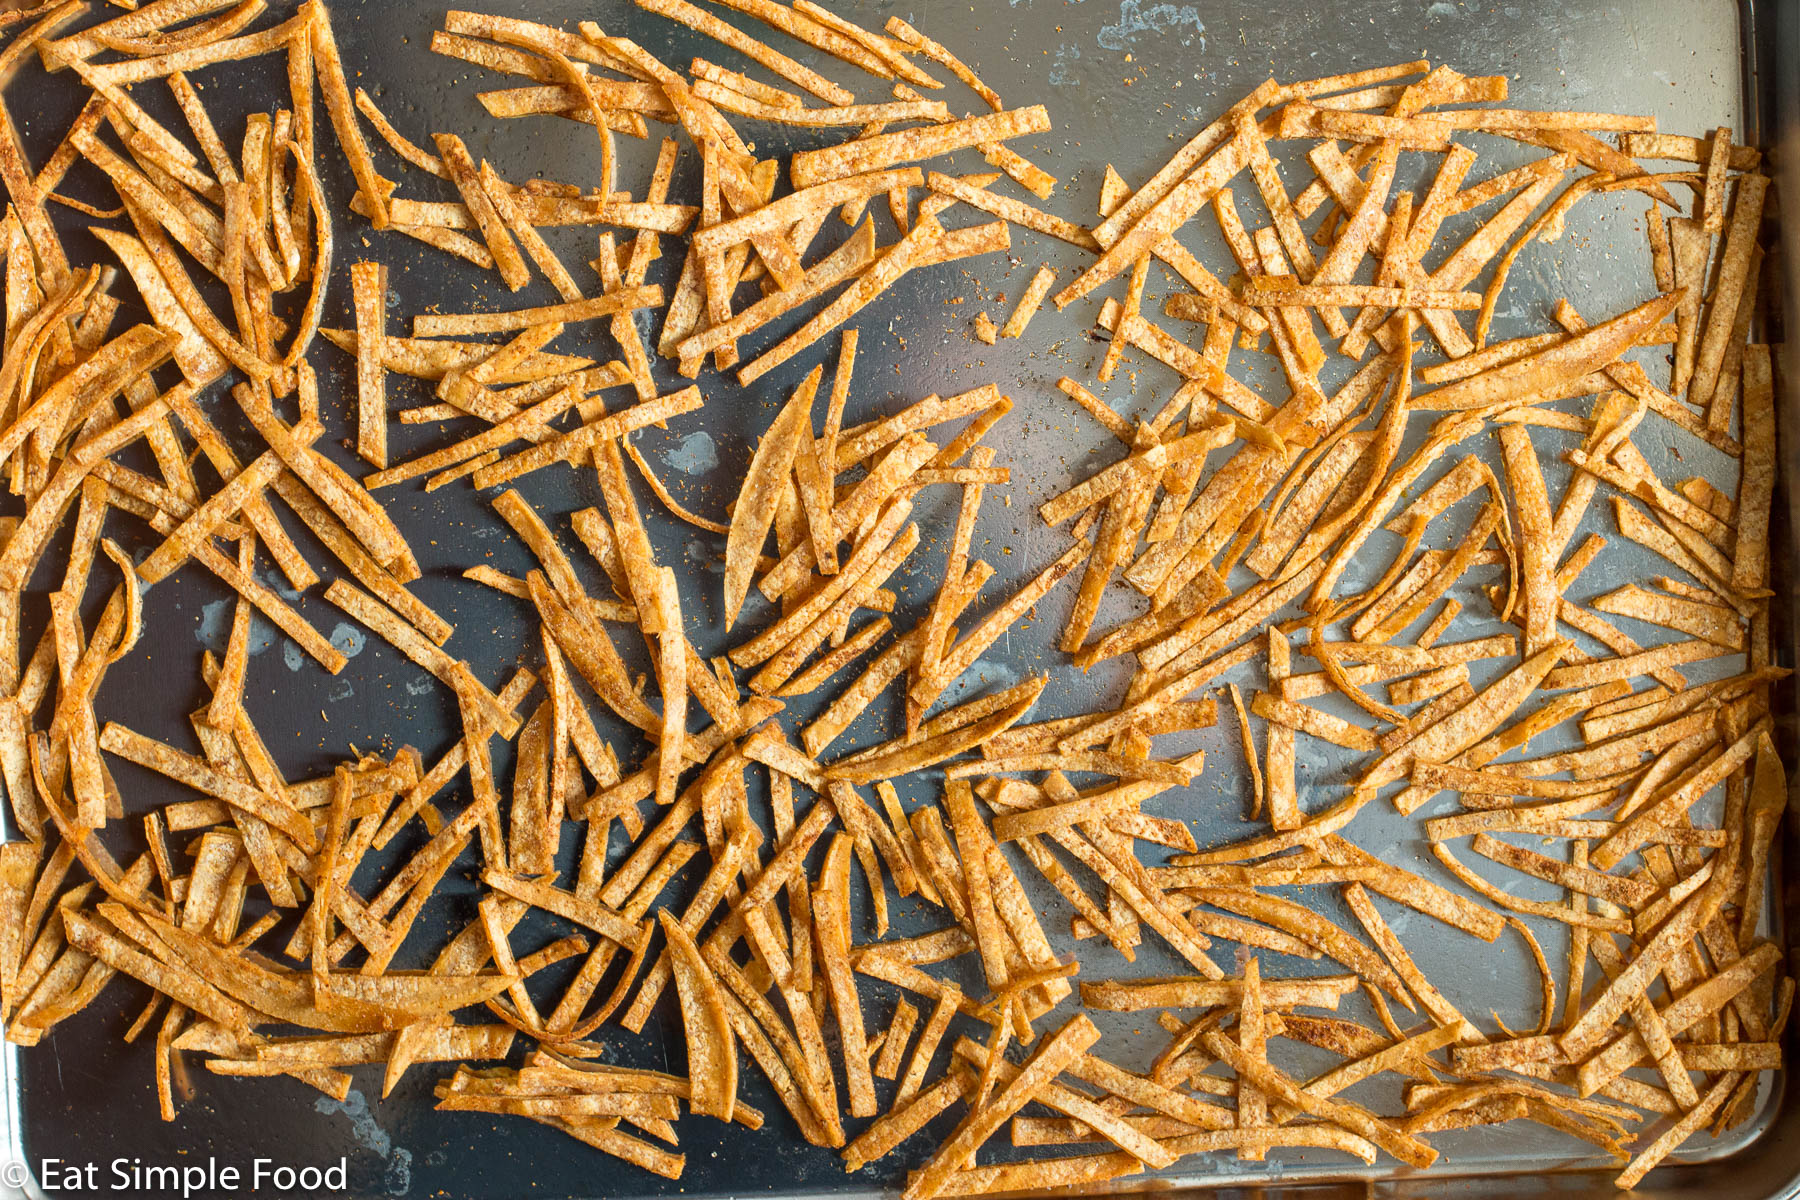 Cooked tortilla strips on a stainless steel sheet pan. Top view.